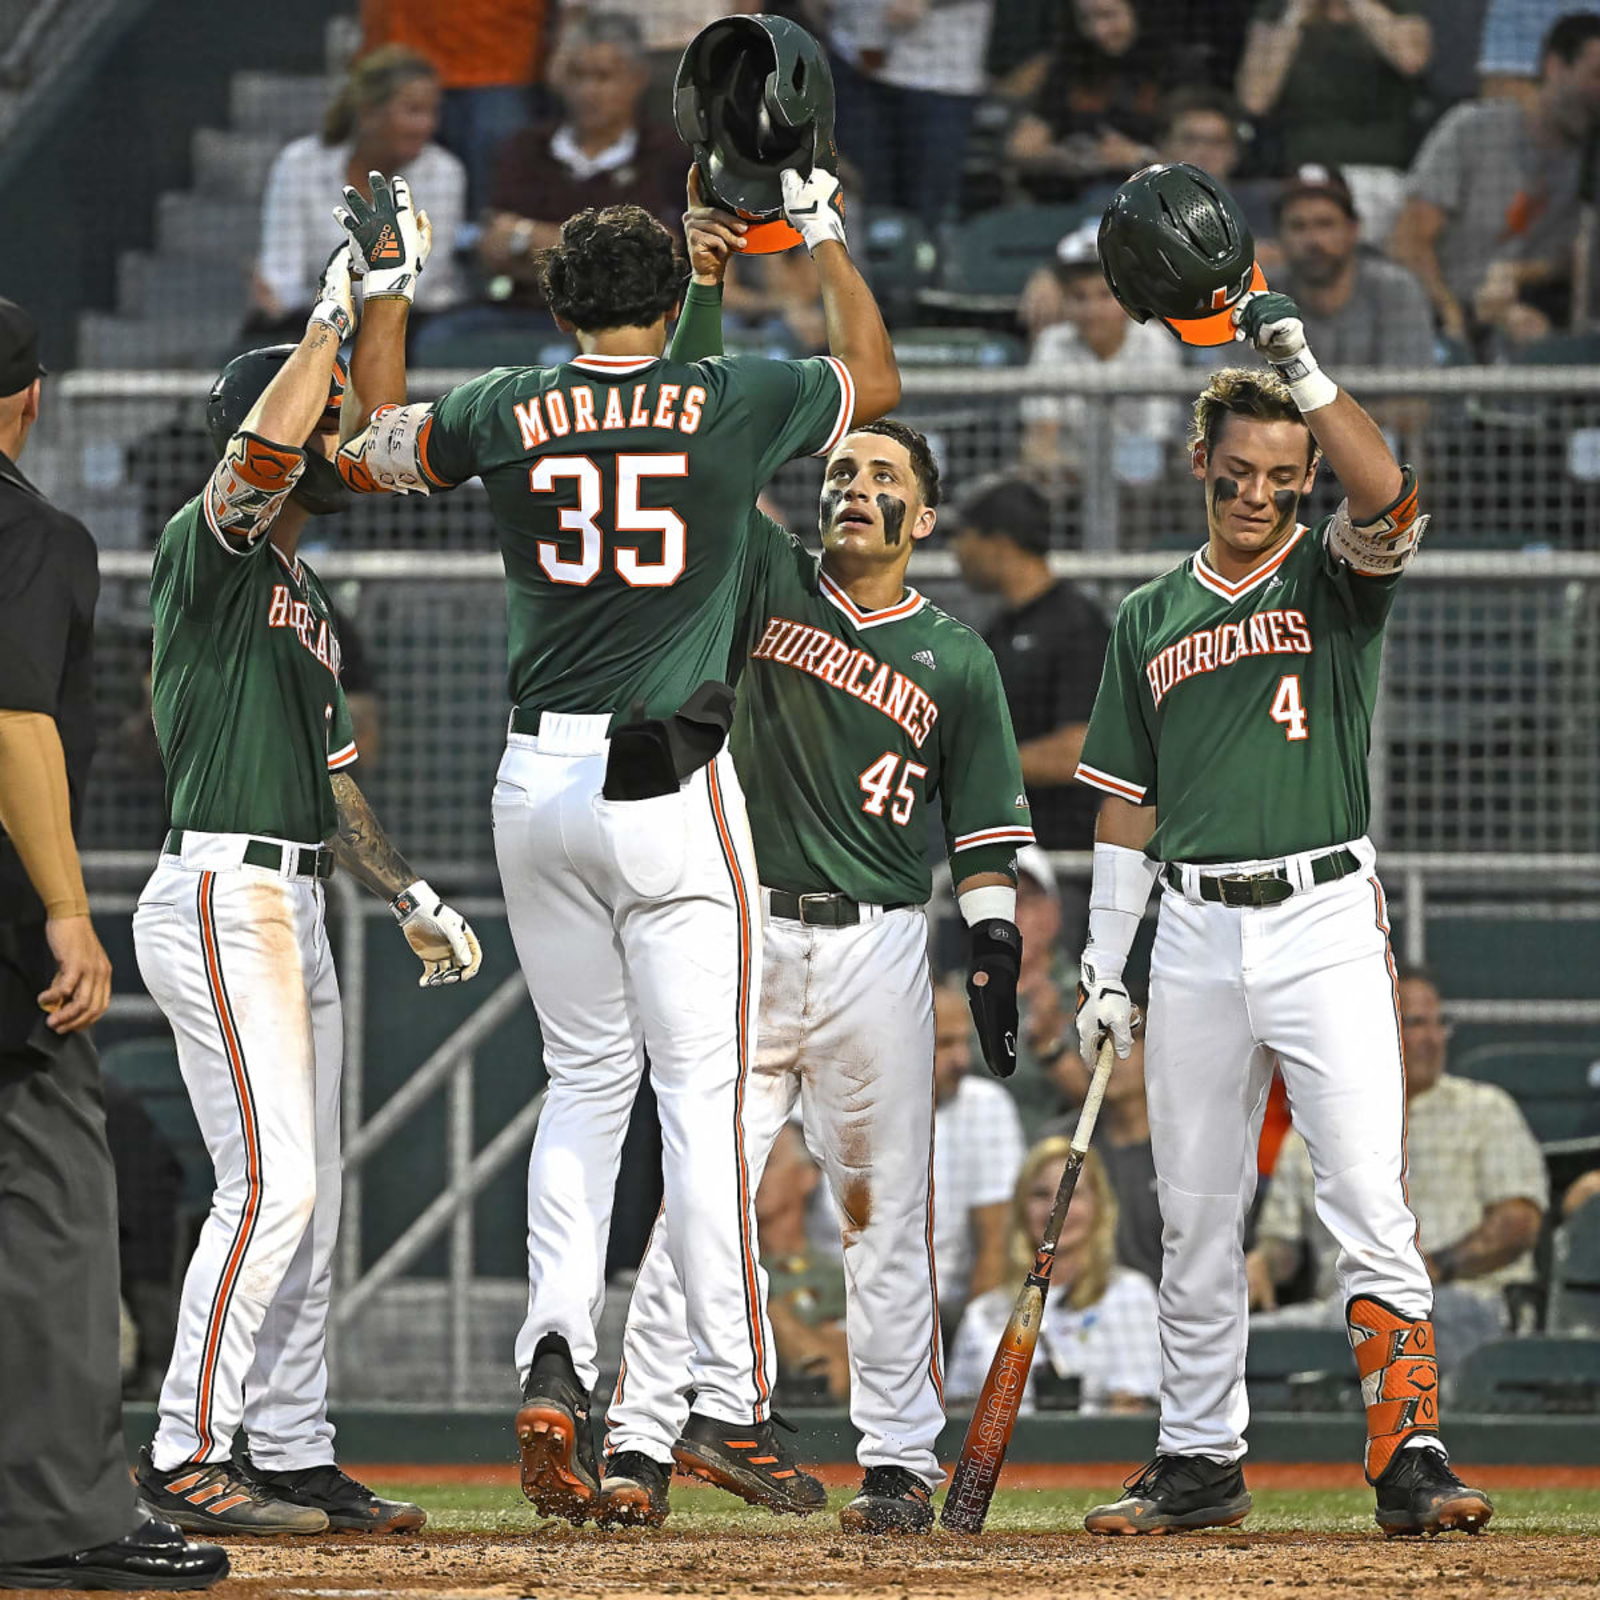 Miami baseball gains No. 15 ranking in coaches poll - State of The U